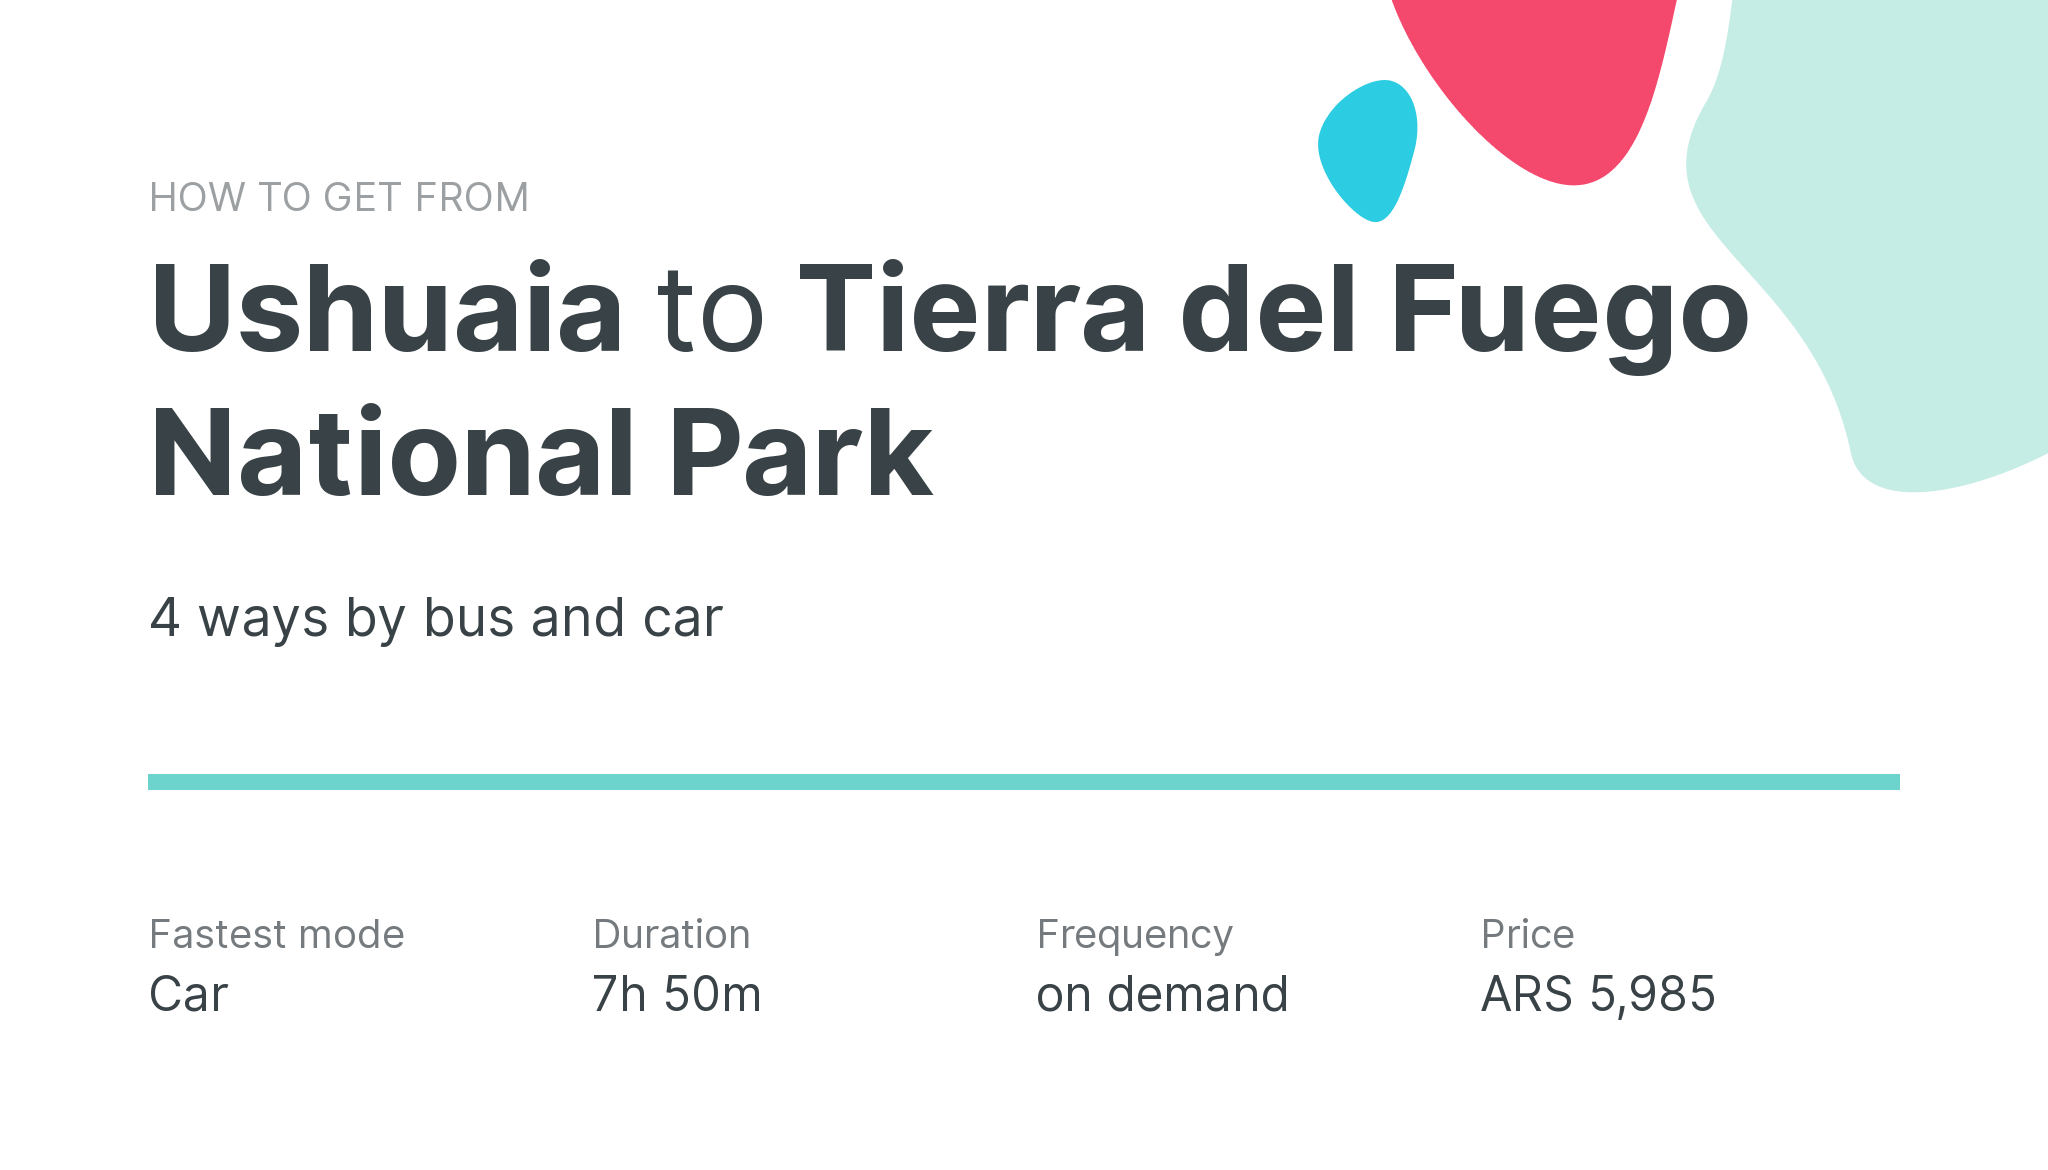 How do I get from Ushuaia to Tierra del Fuego National Park